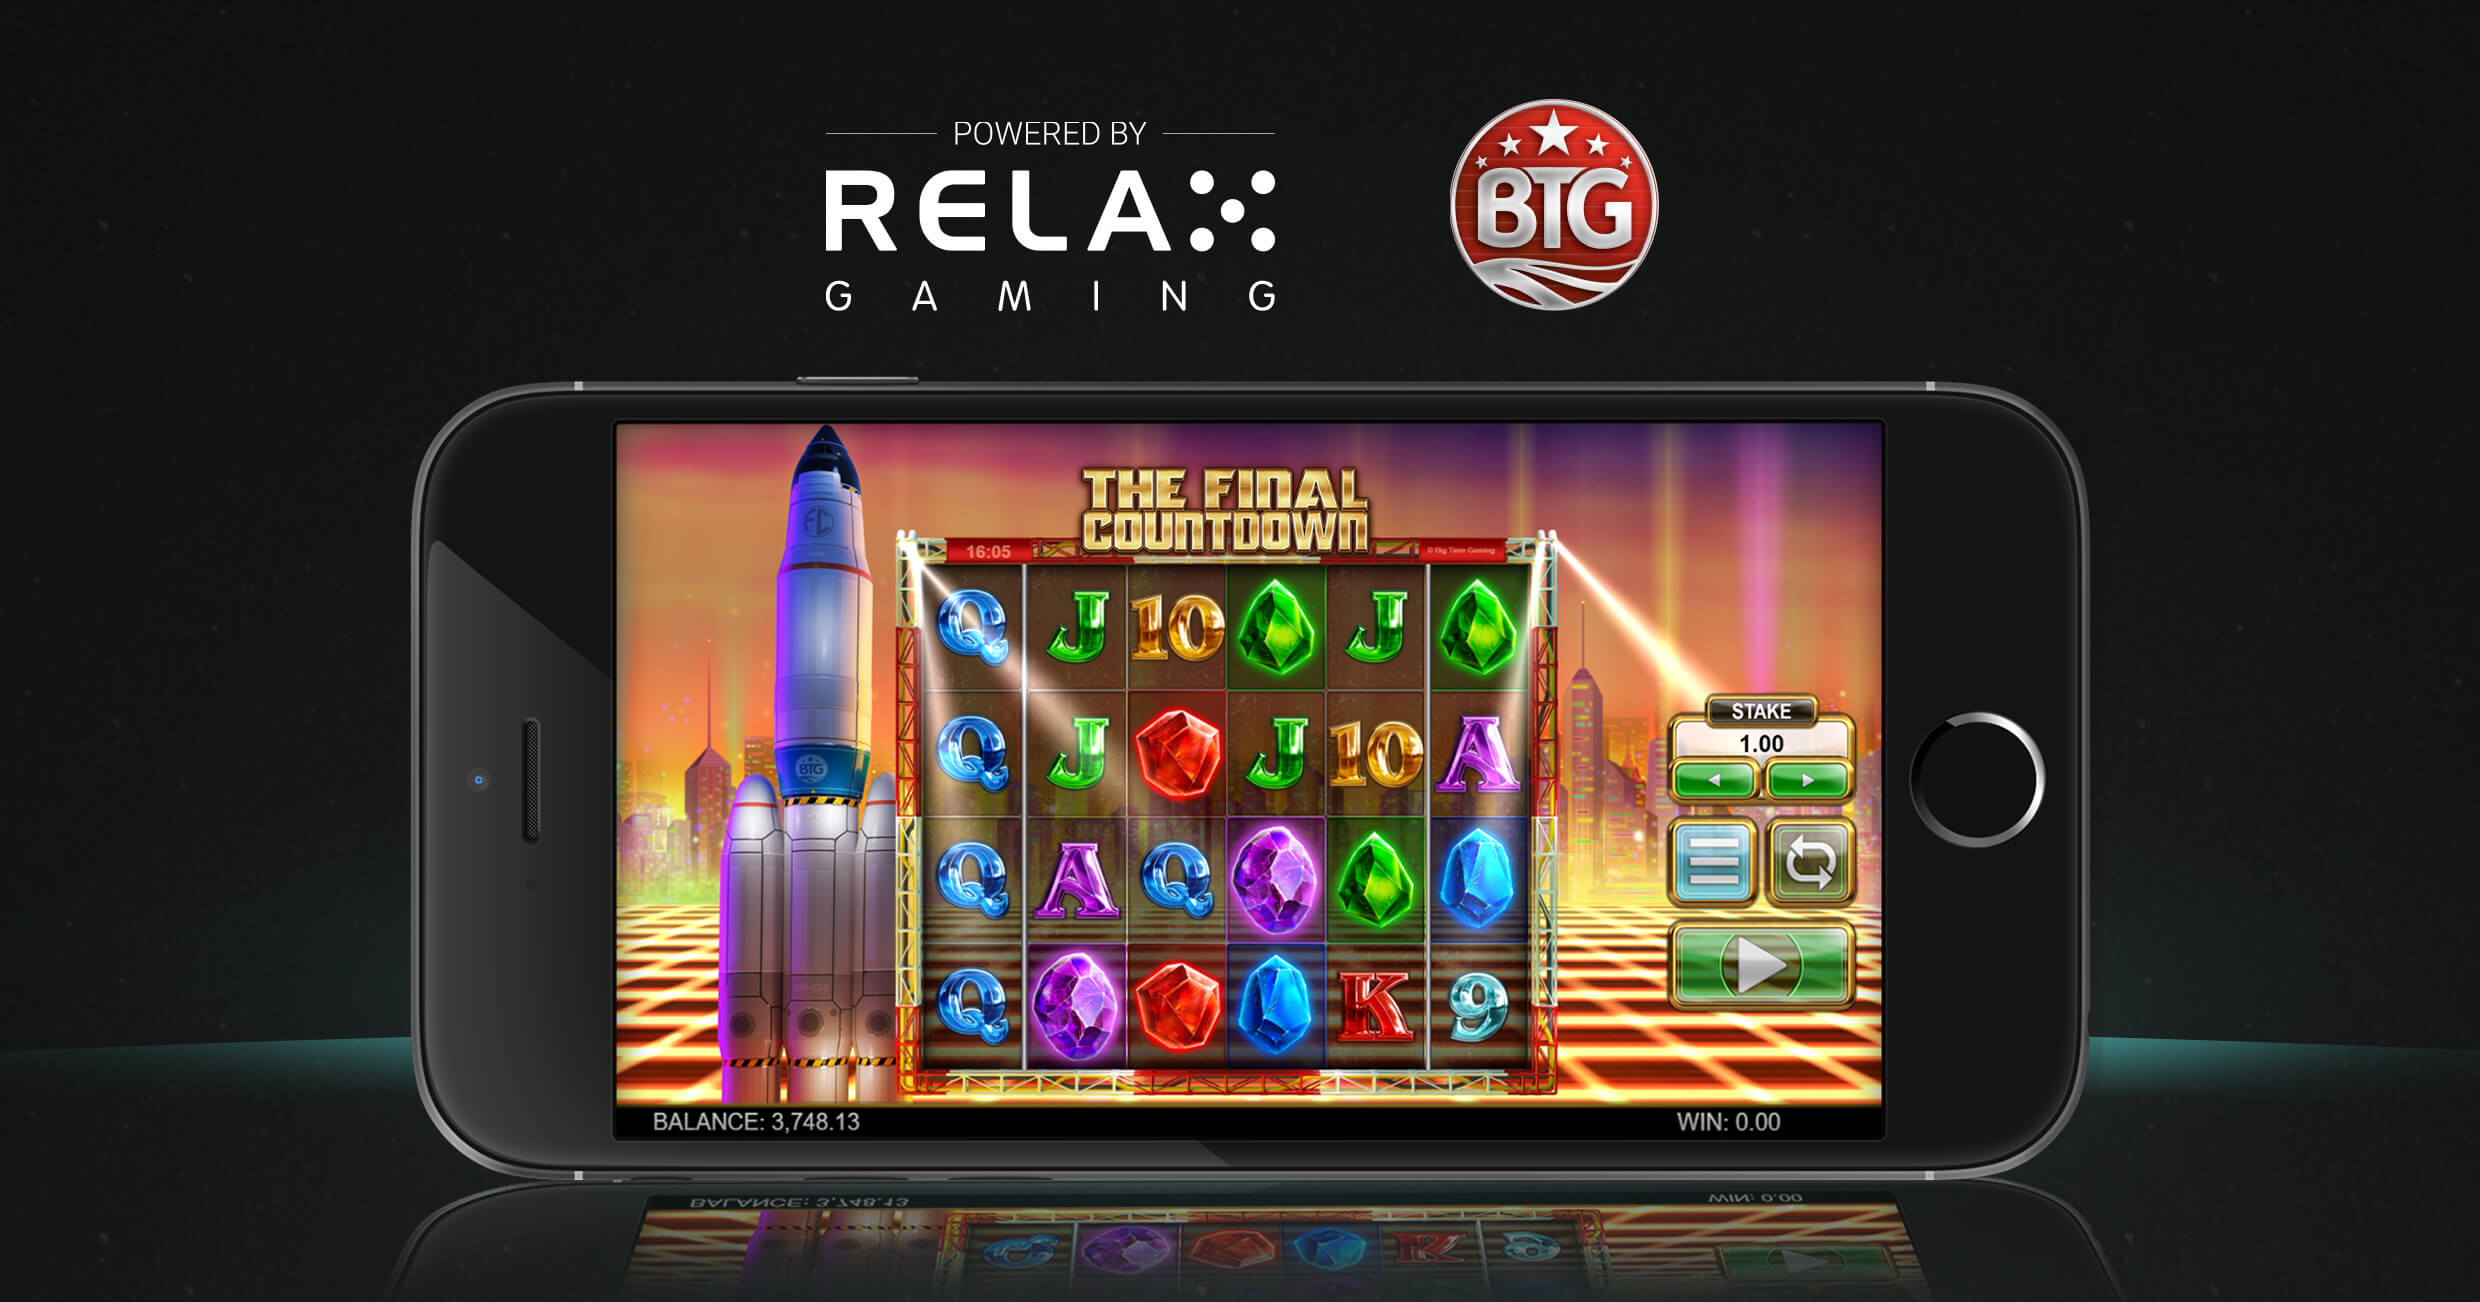 Blast off for epic wins in BTG’s latest slot launch, The Final CountdownTM